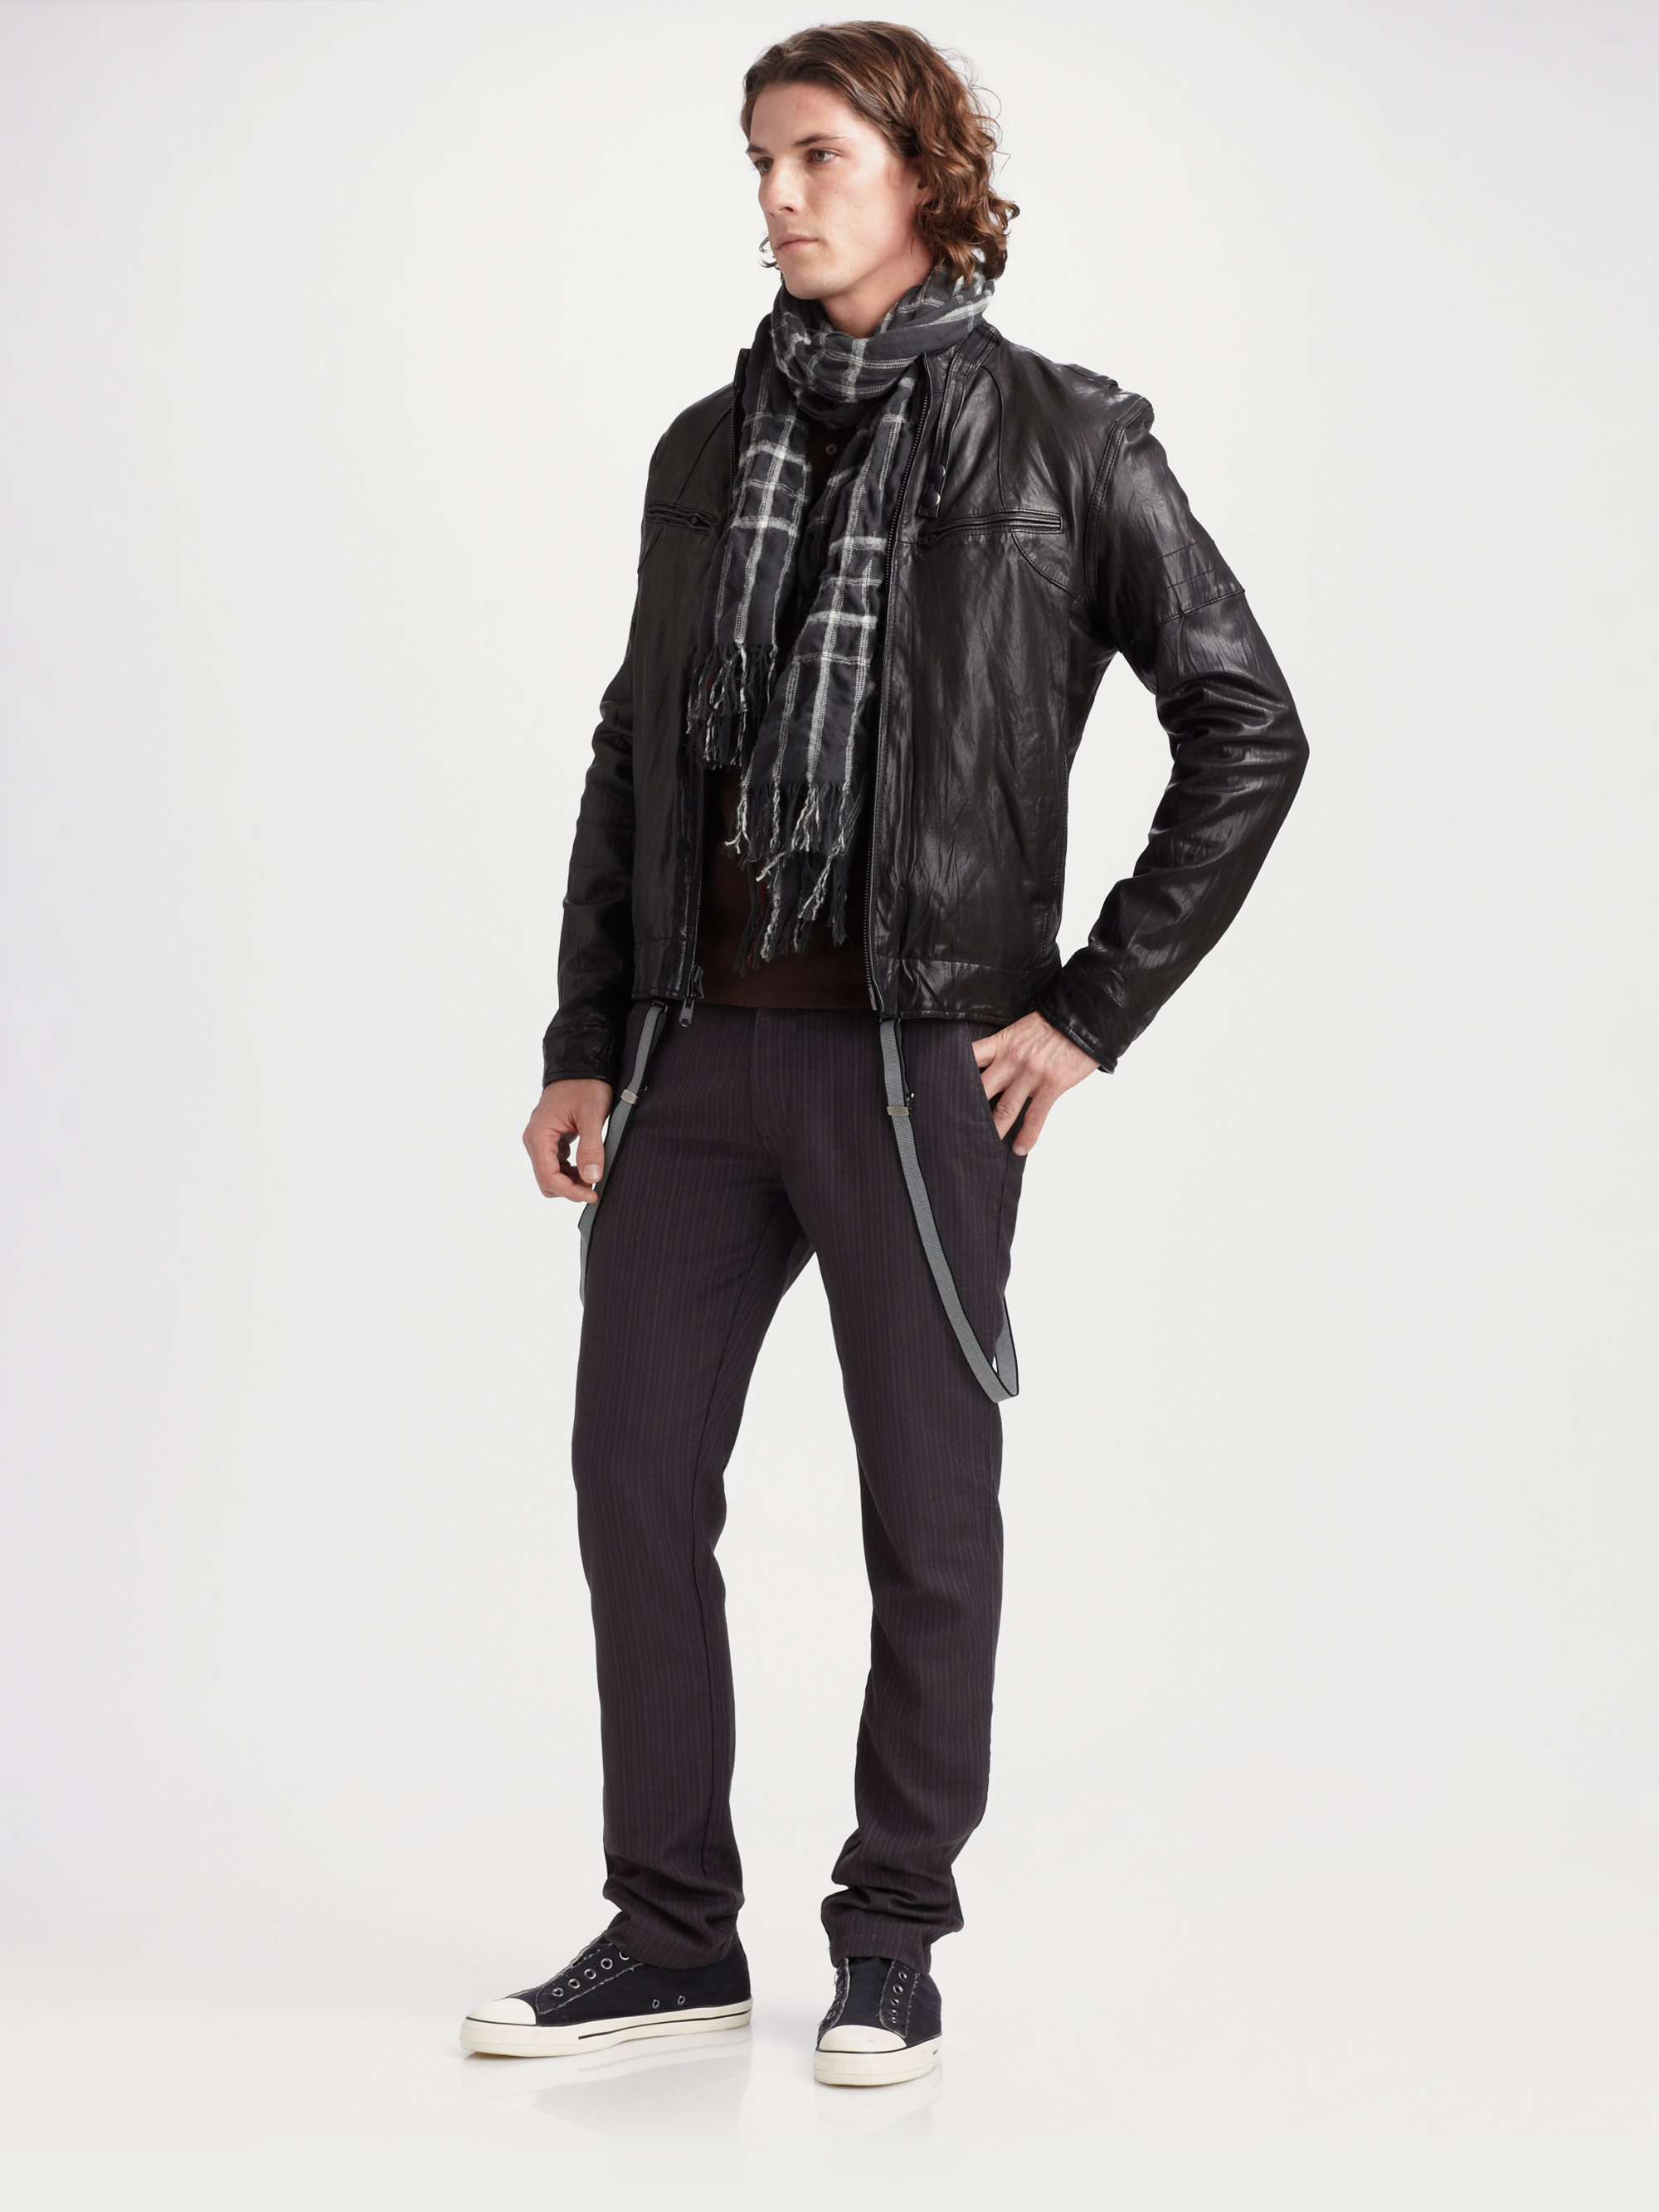 Converse Washed Leather Jacket in Black for Men - Lyst